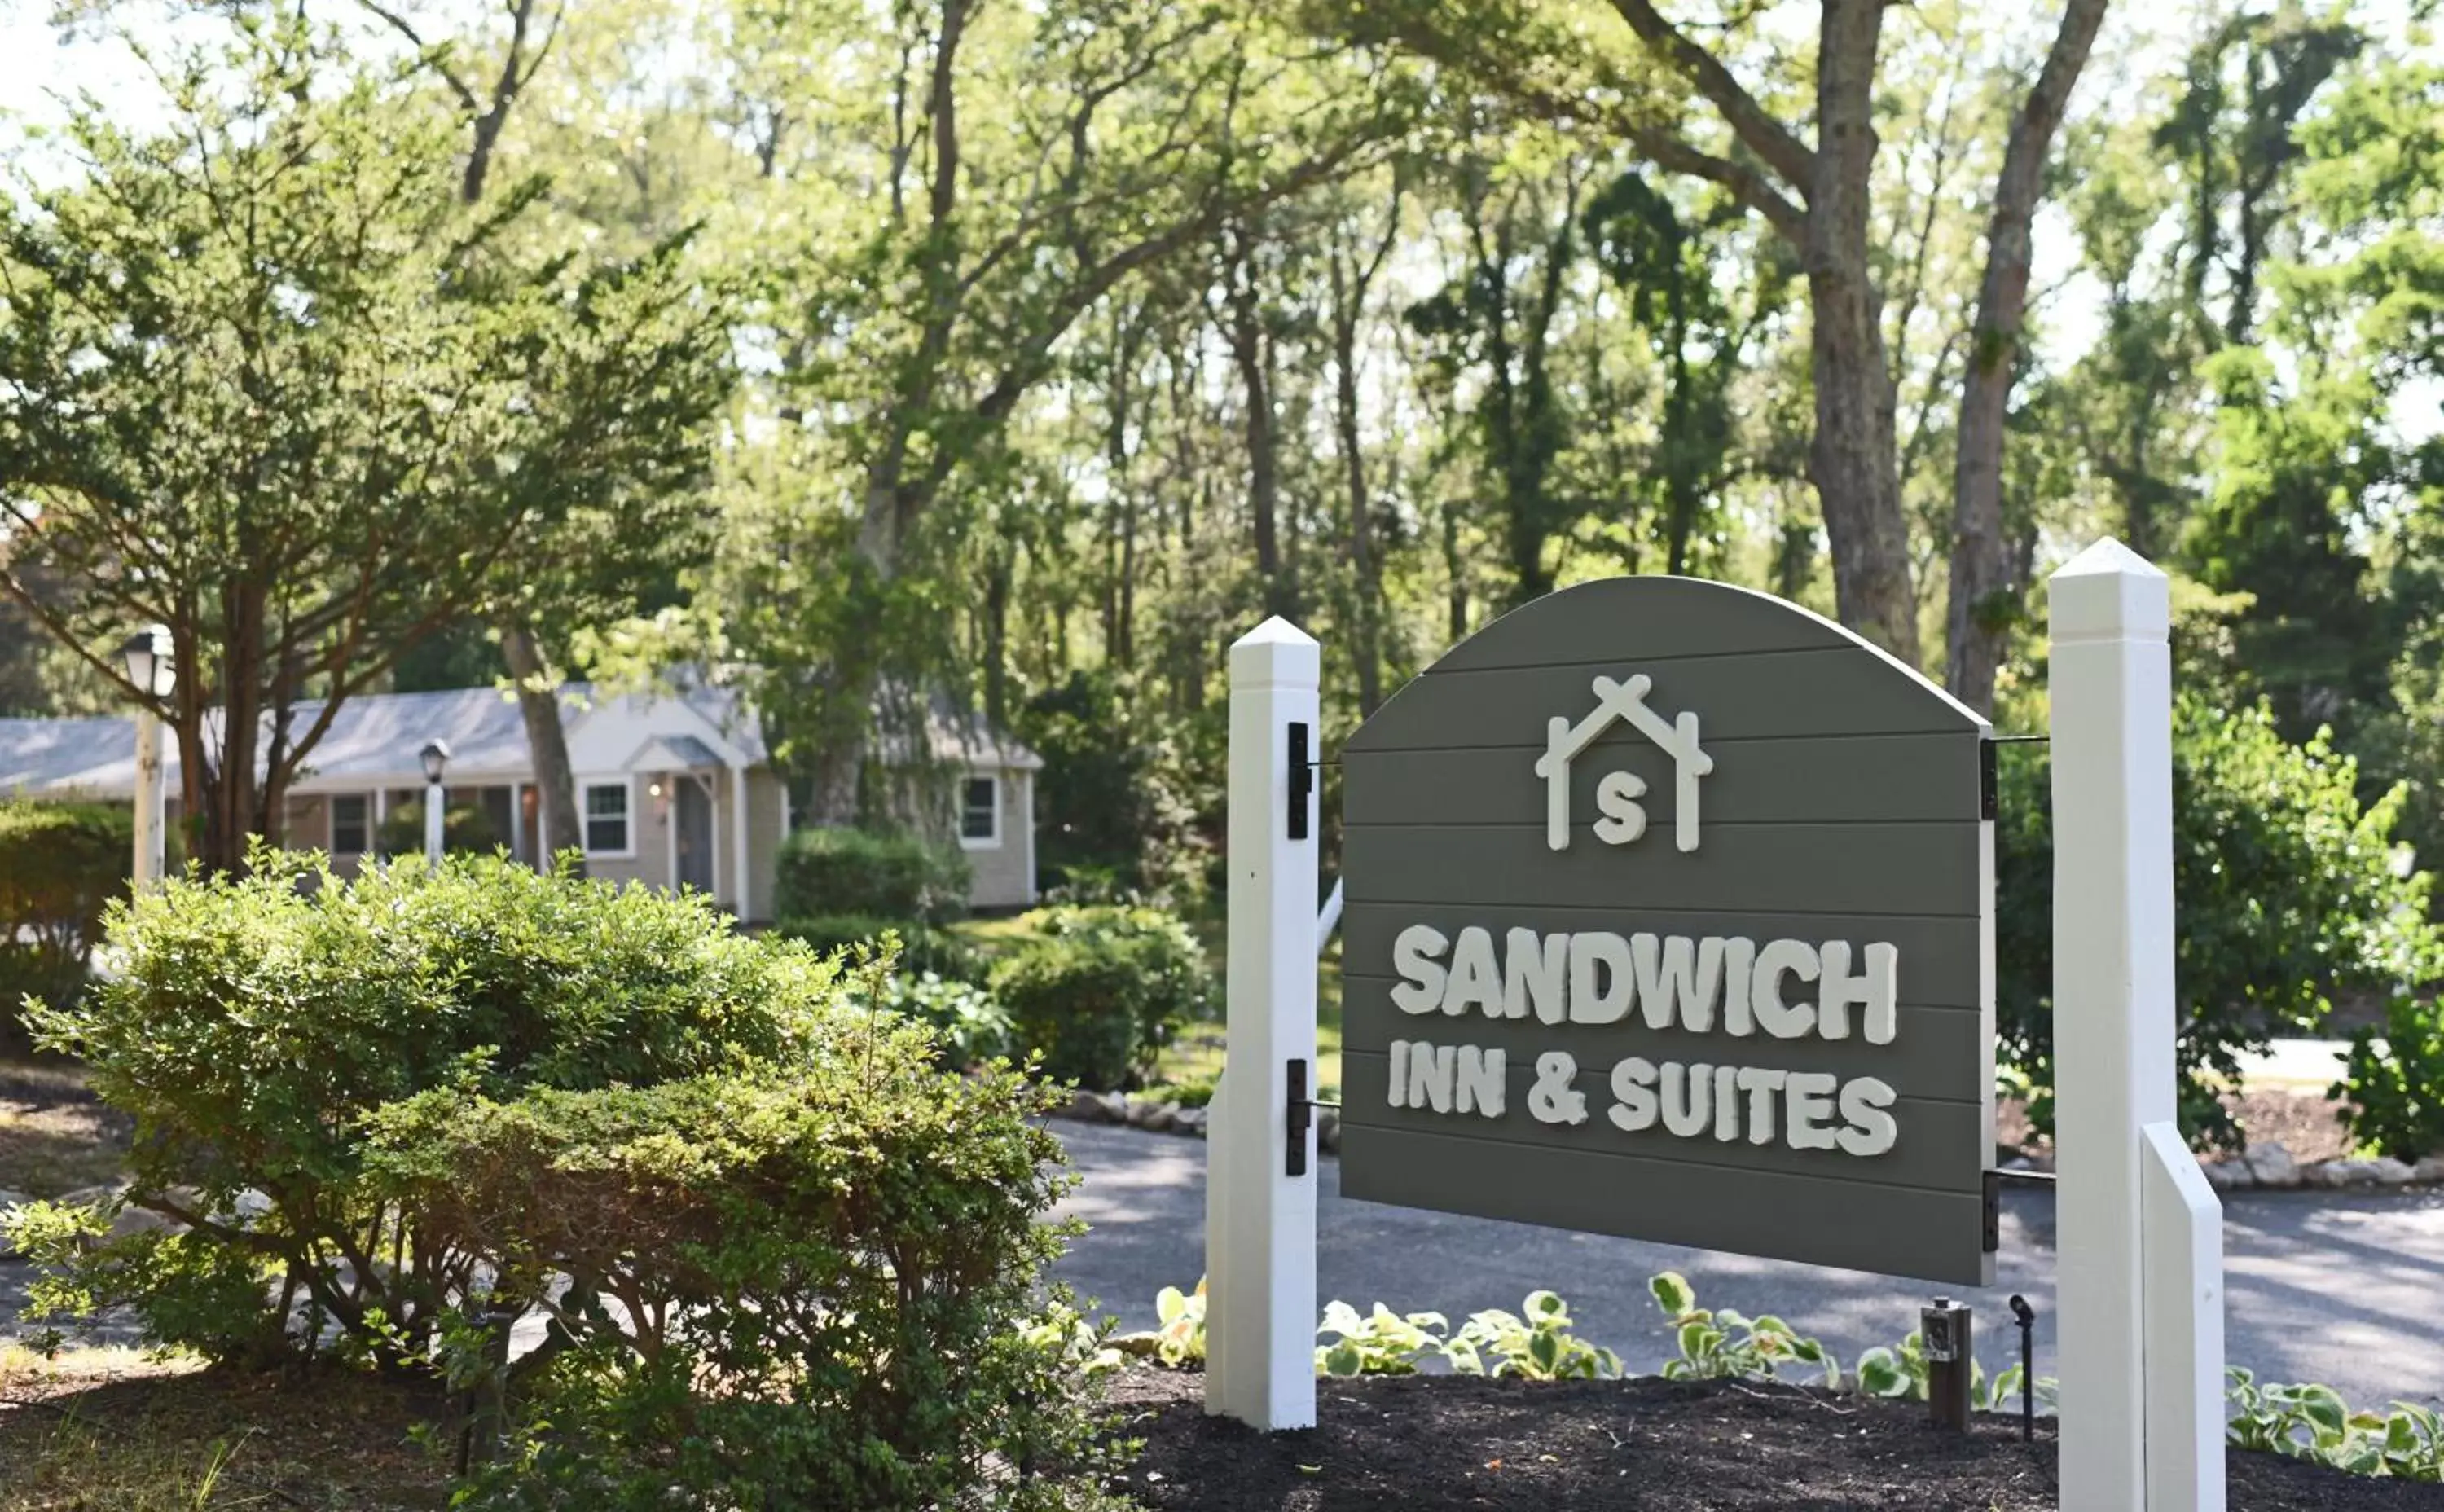 Property logo or sign in Sandwich Inn and Suites